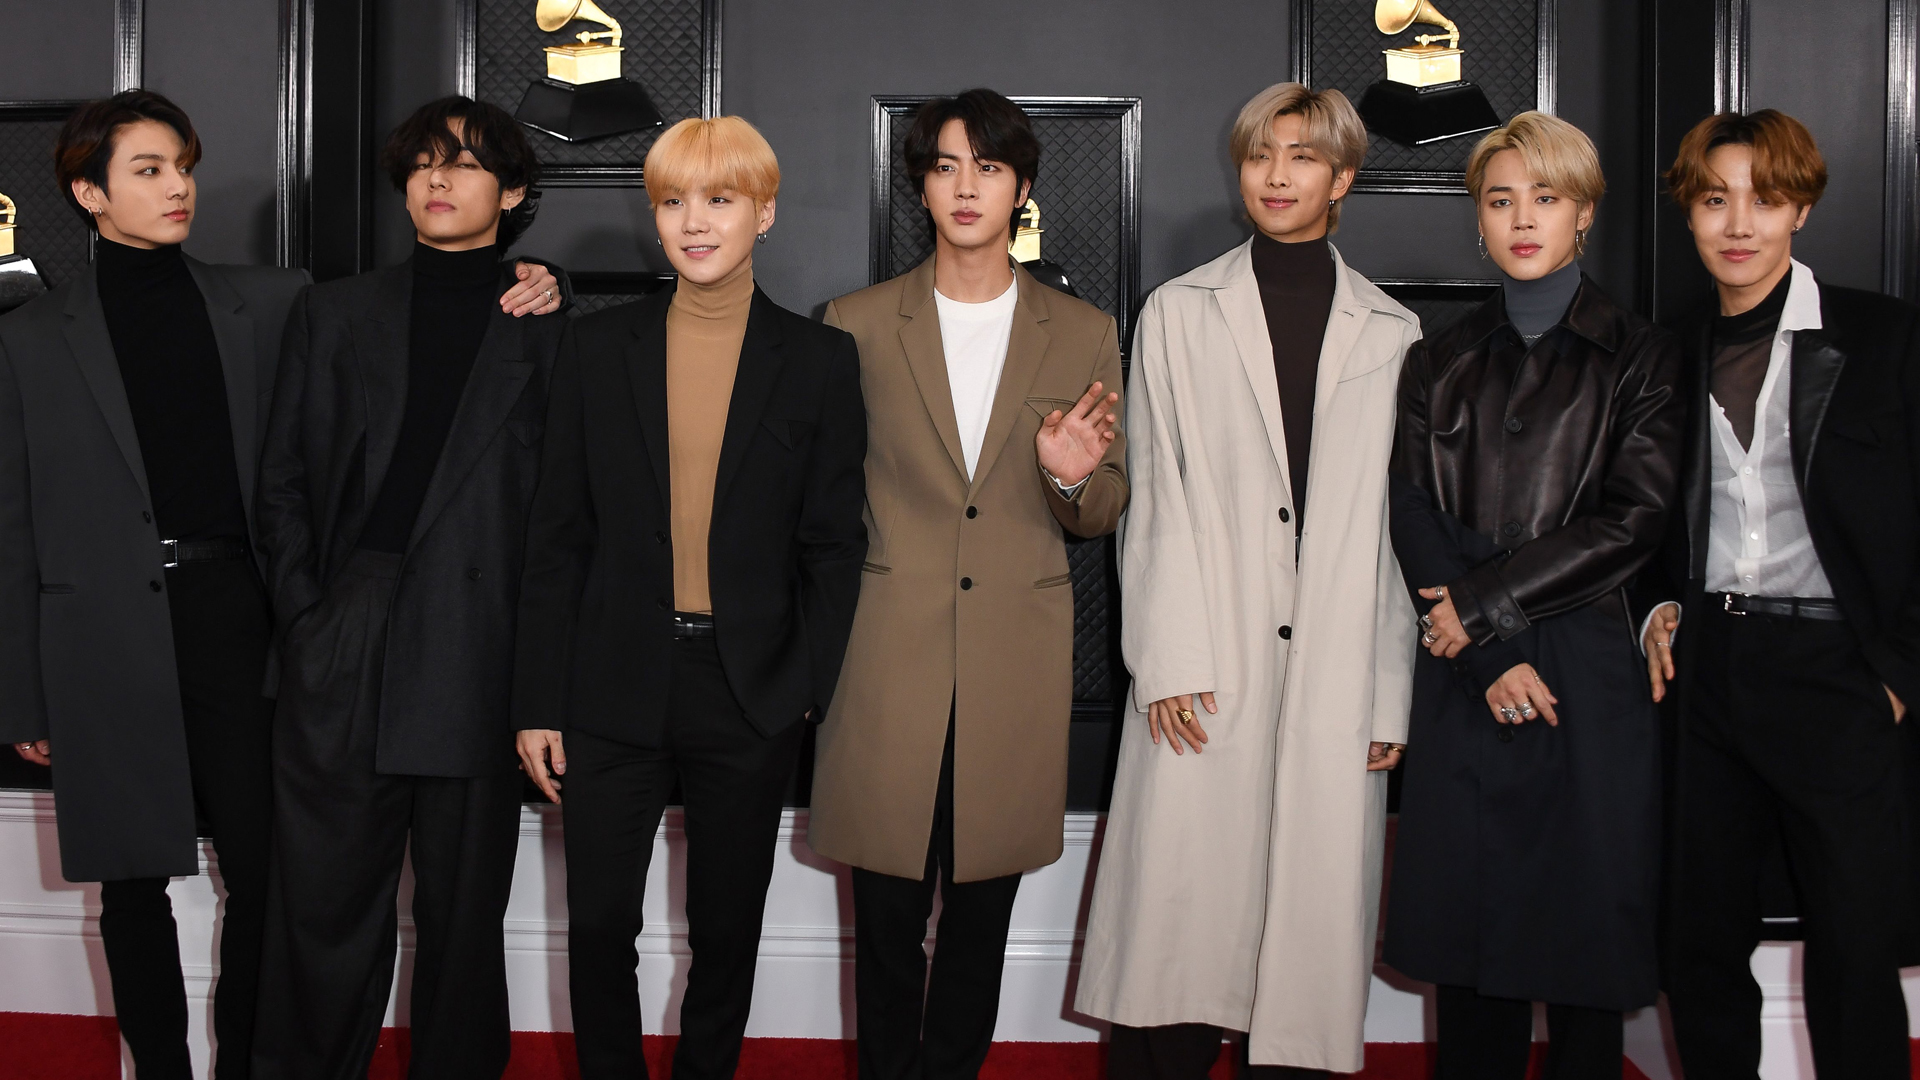 BTS rehearse for their 2020 Grammys performance with Lil Nas X